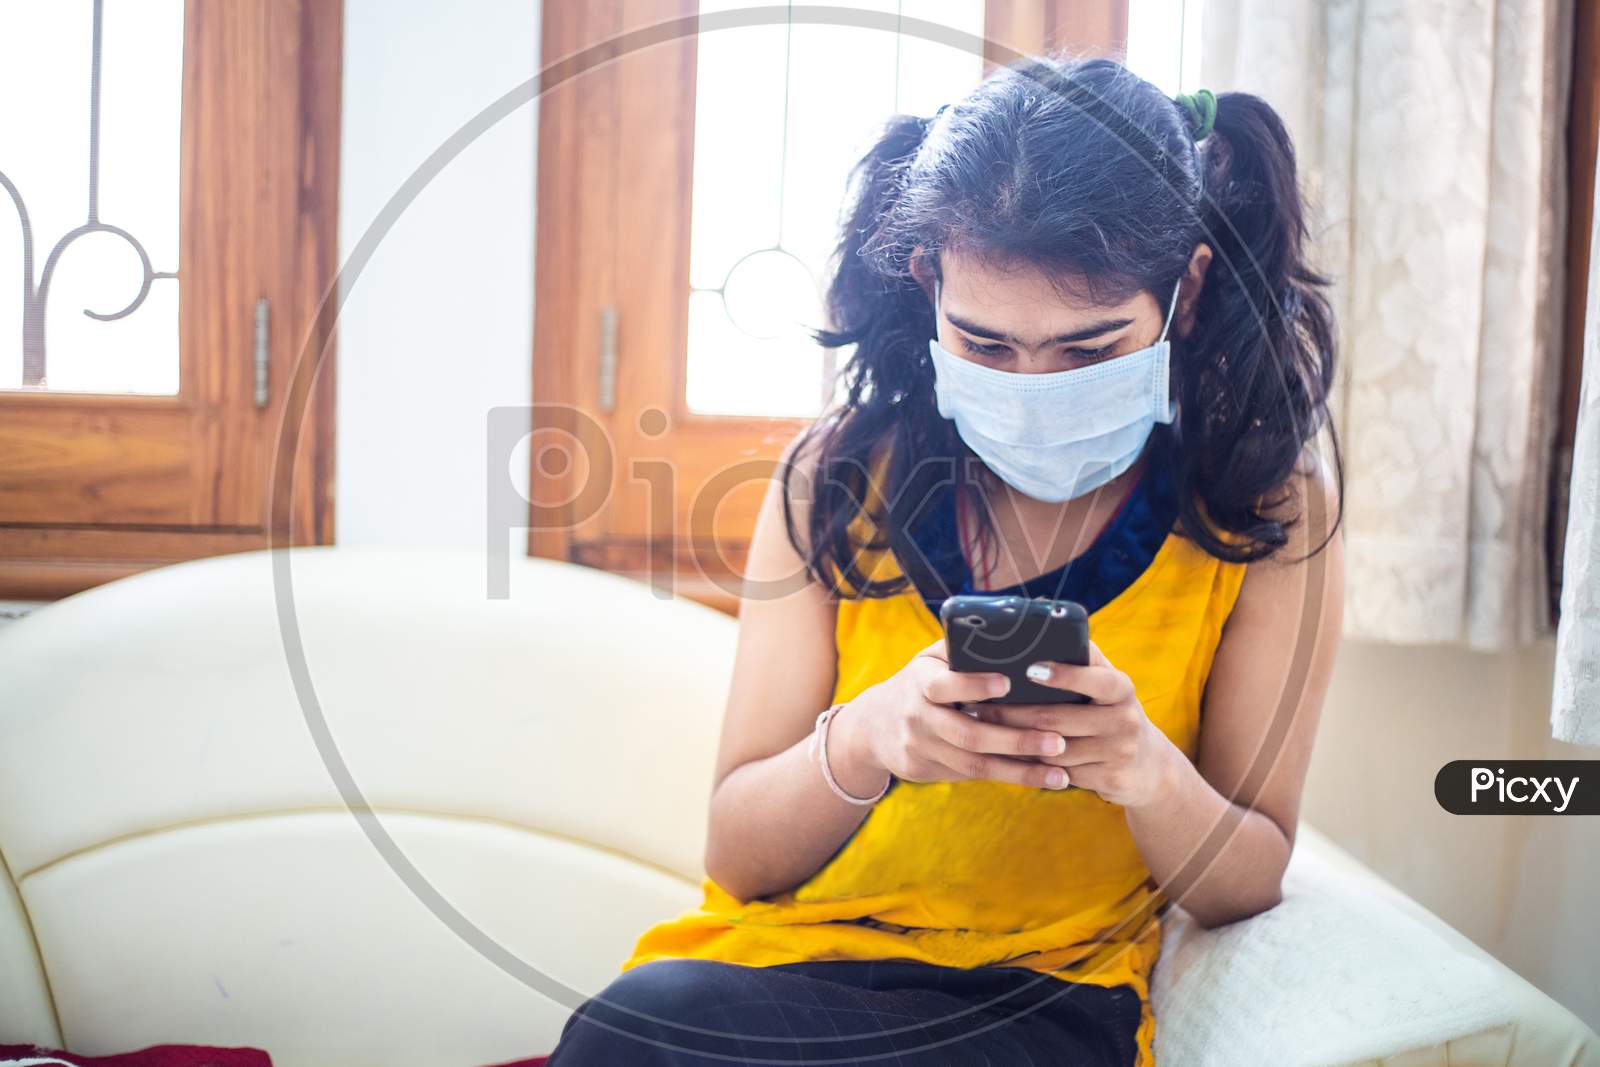 Young Girl Quarantined At Home During World Pandemic Of Coronavirus Covid-19 Prevention. Stay At Home, Stay Safe. Girl With Protective Medical Mask Using Smatphone. Isolation, Lock Down Situation.